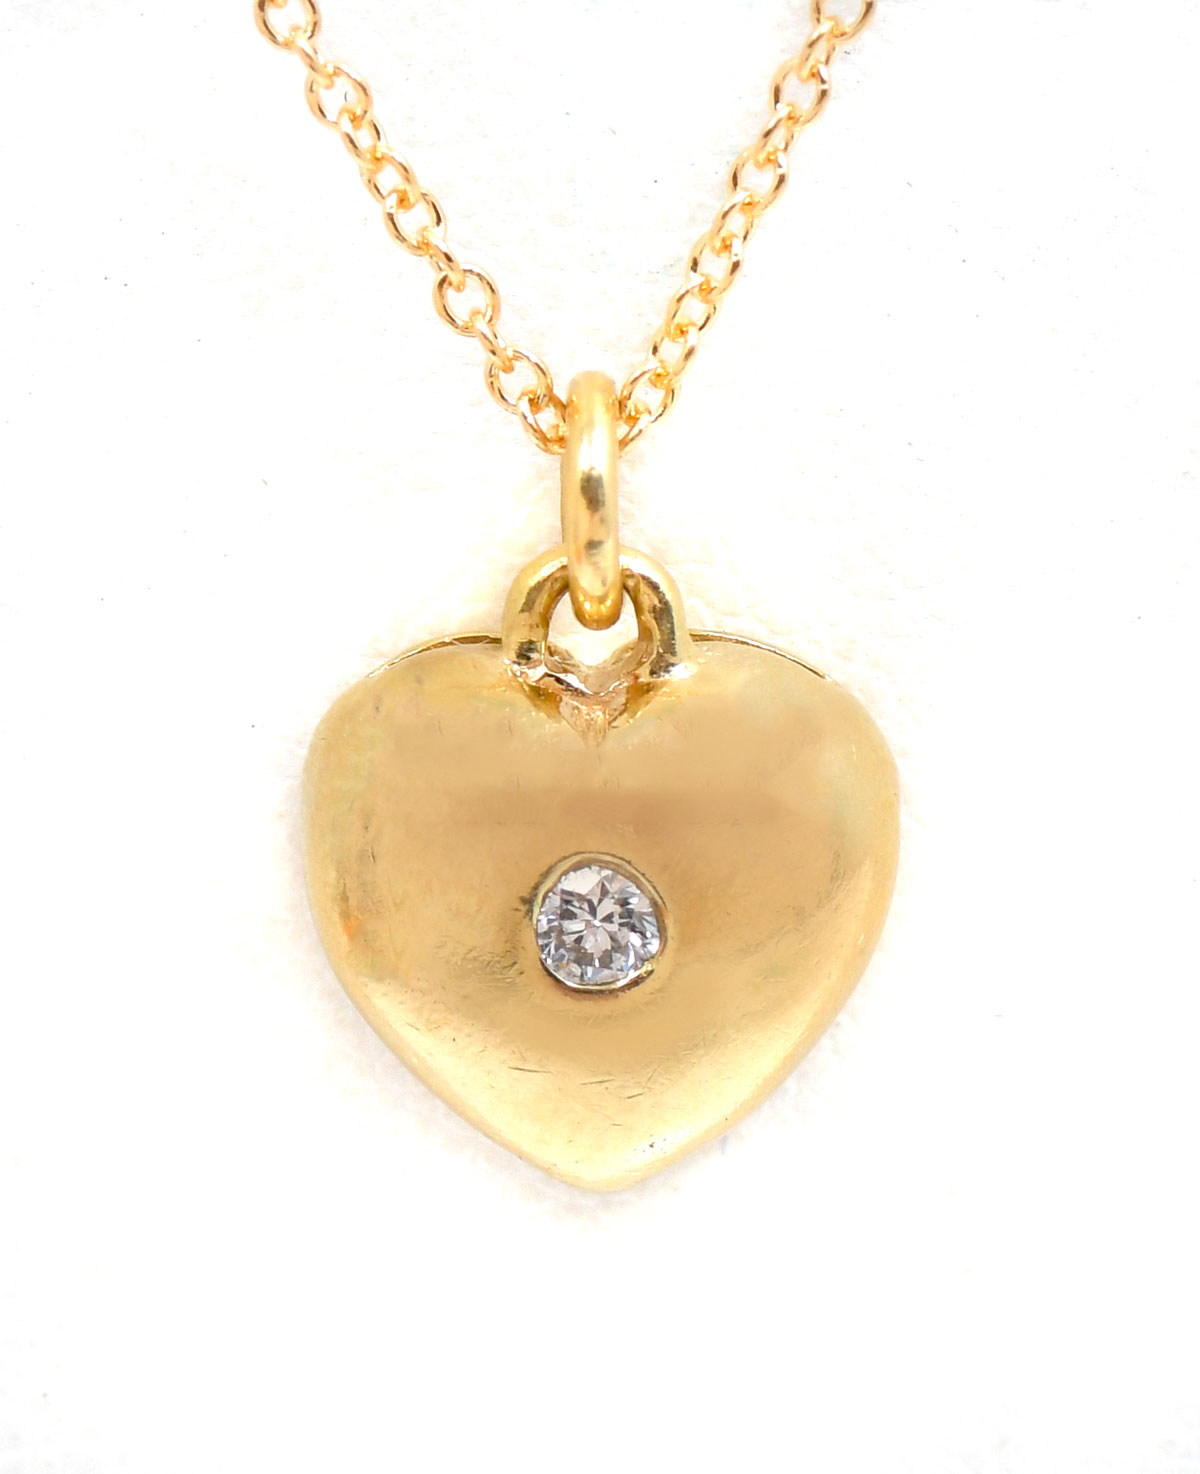 80'S 18K PUFFY HEAR PENDANT & NECKLACE: